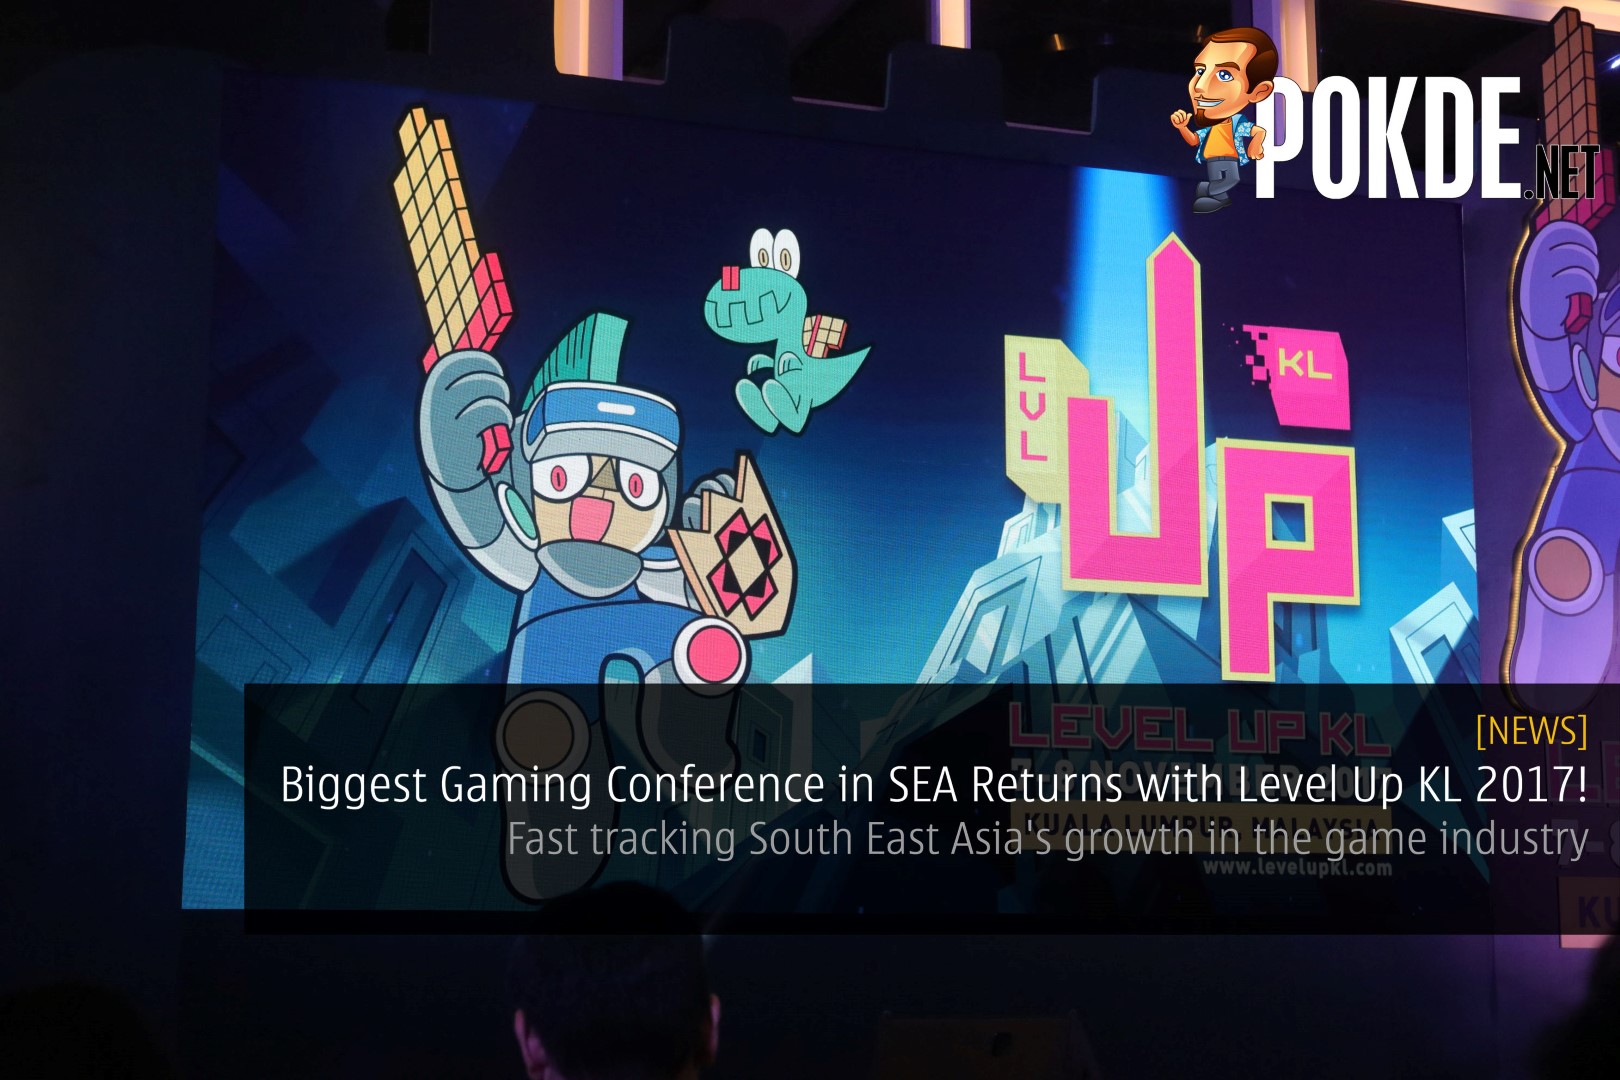 Biggest Gaming Conference in SEA Returns with Level Up KL 2017! - Fast tracking South East Asia's growth in the game industry 42